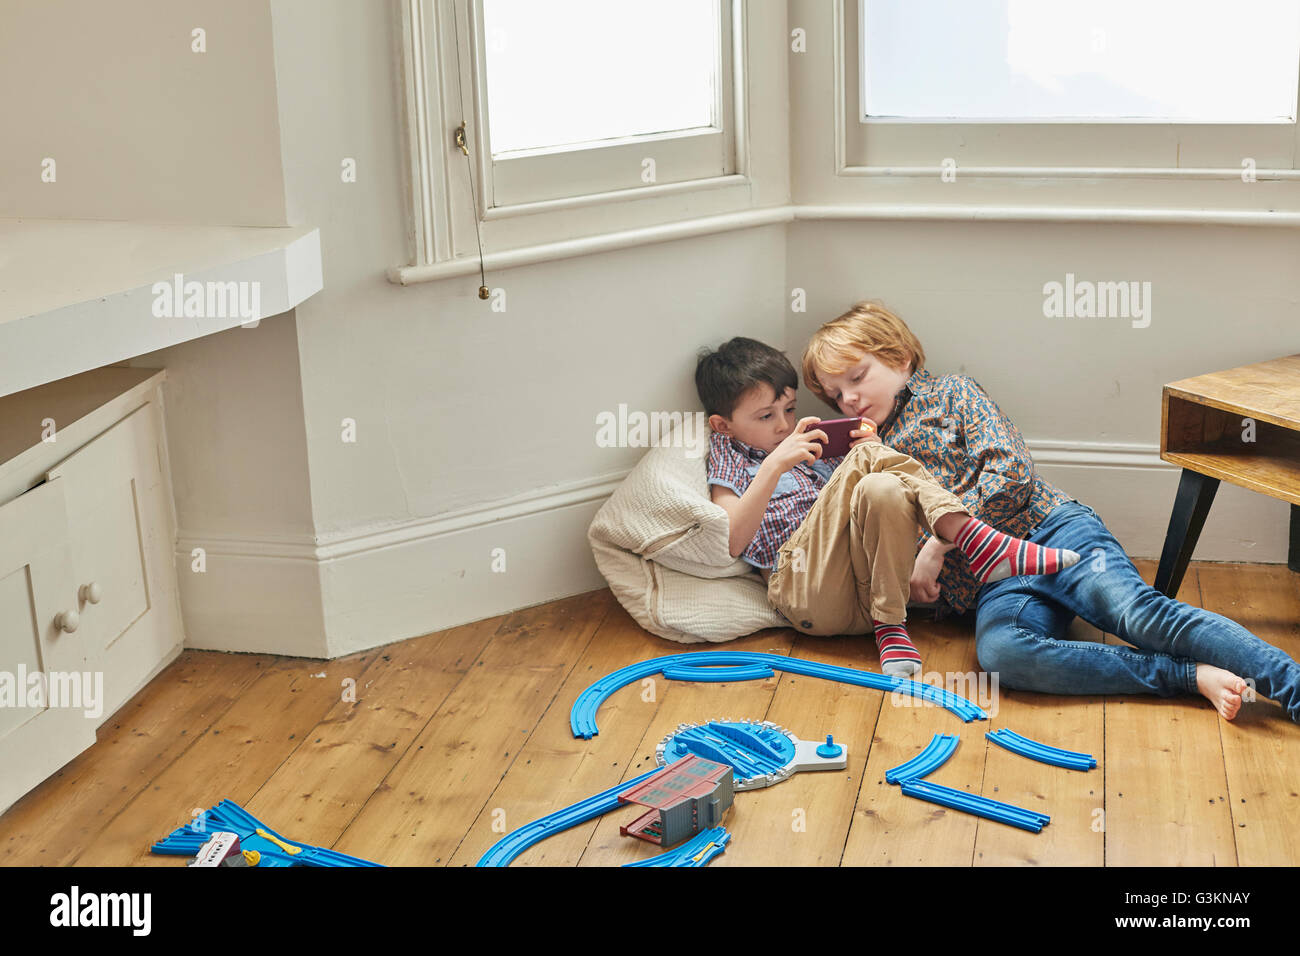 Two young boys, sitting indoors, looking at smartphone Stock Photo